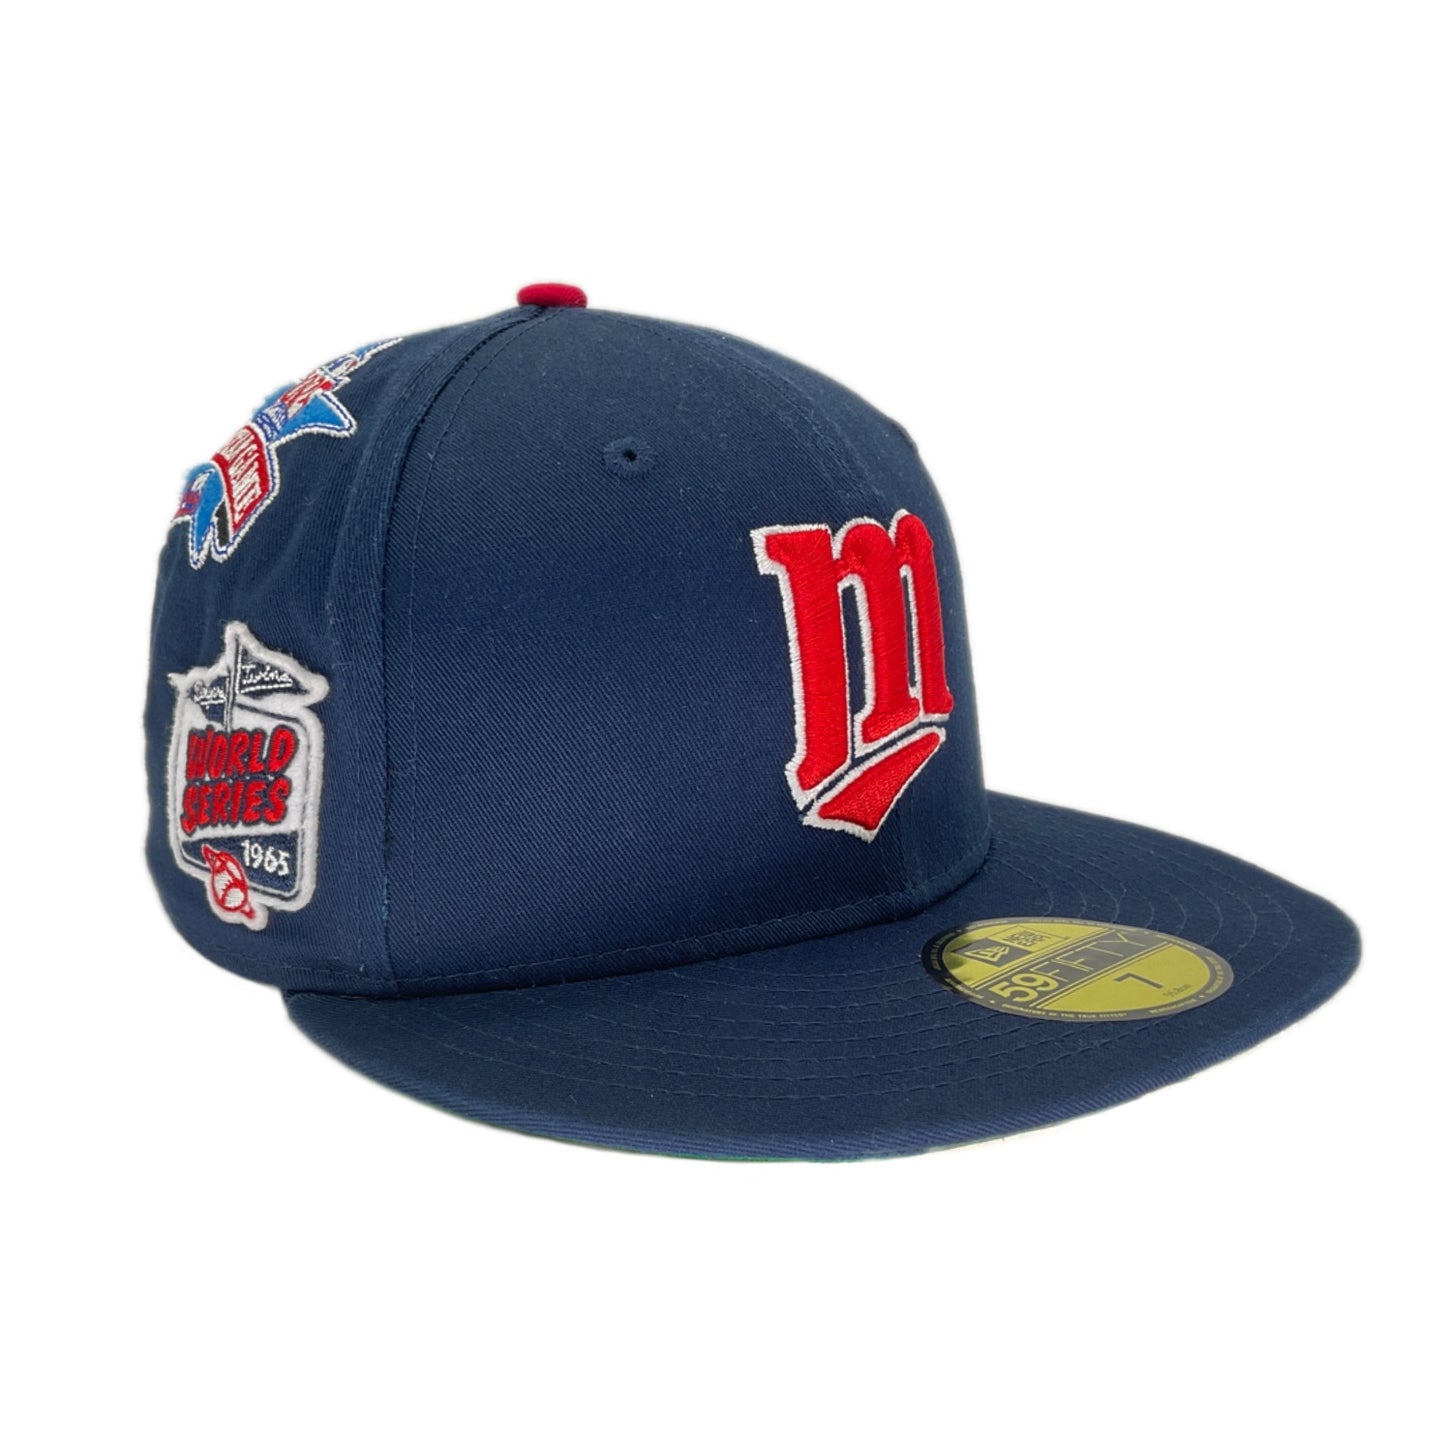 Minnesota Twins Cooperstown Patches New Era Cap Navy